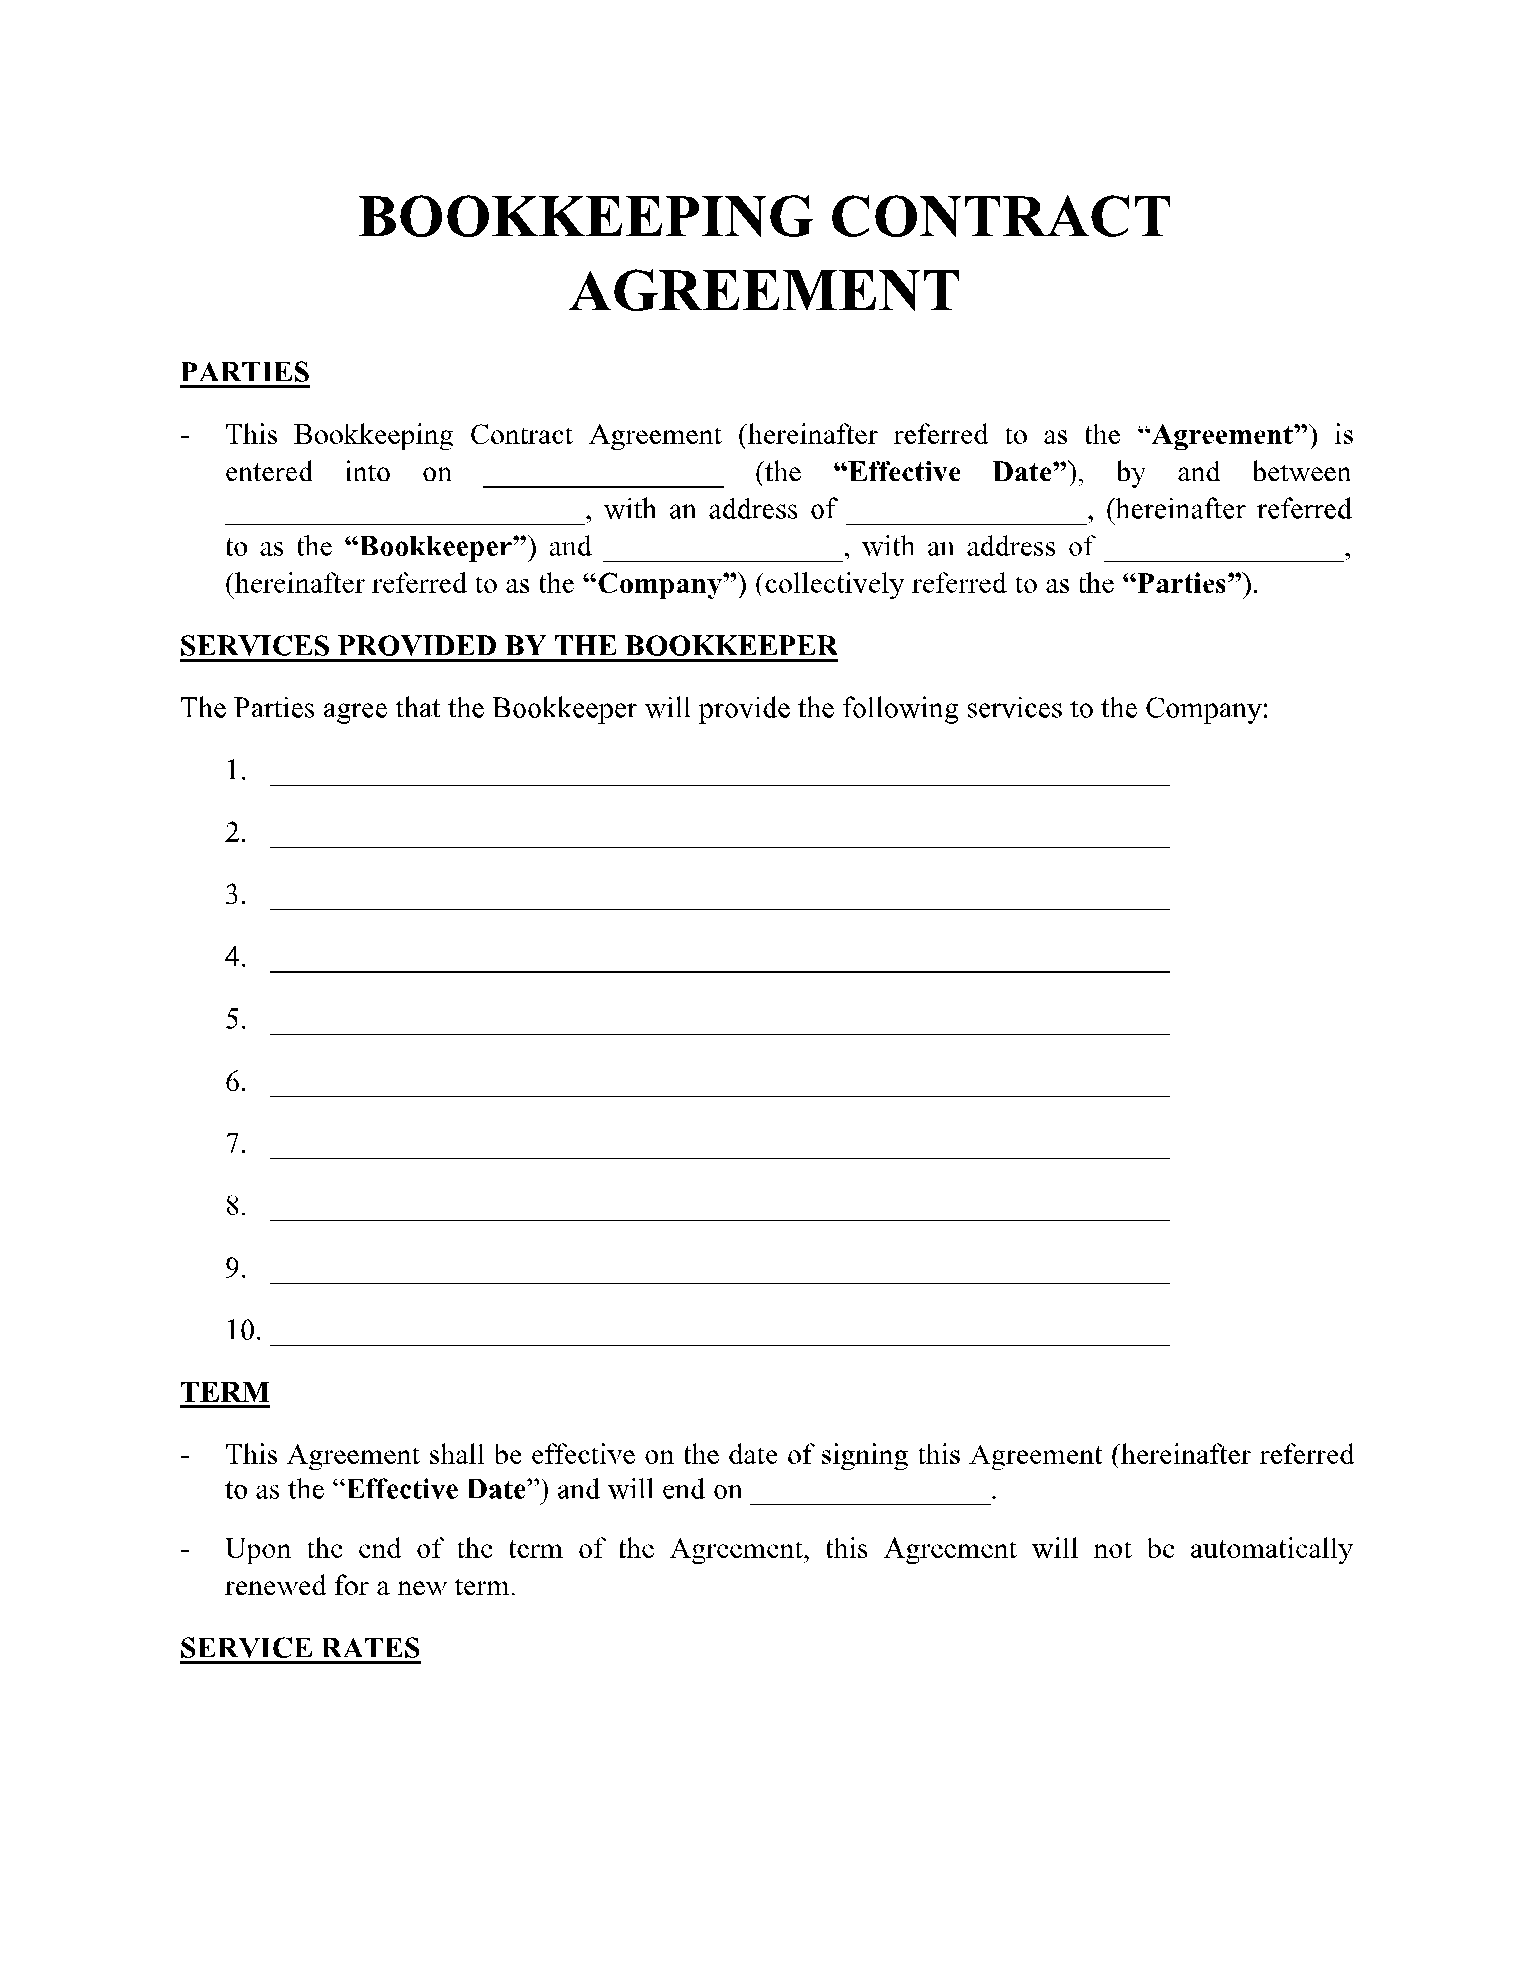 Bookkeeping Contract